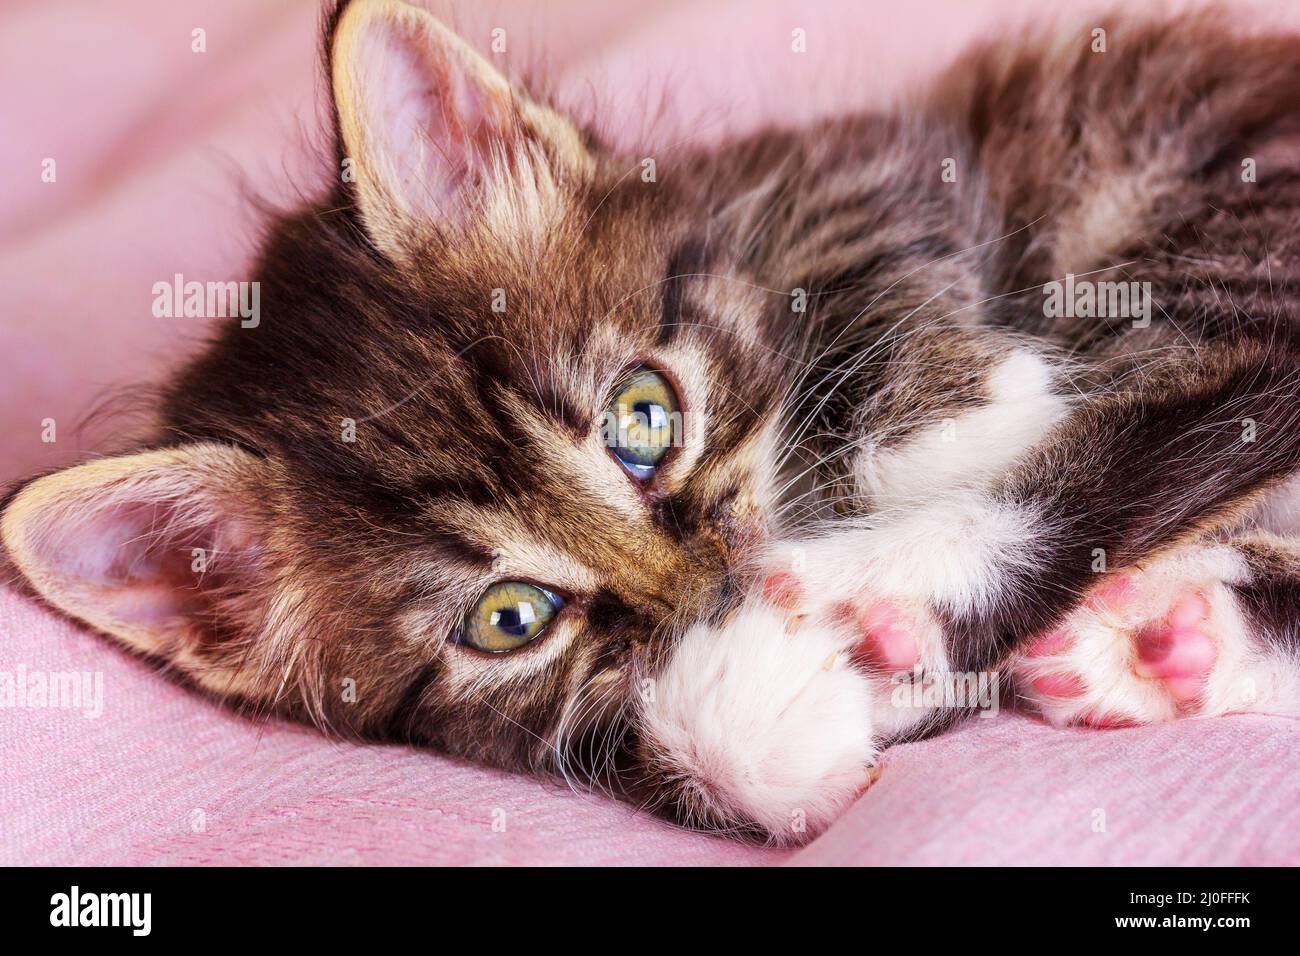 A small fluffy kitty lies on a pink blanket Stock Photo